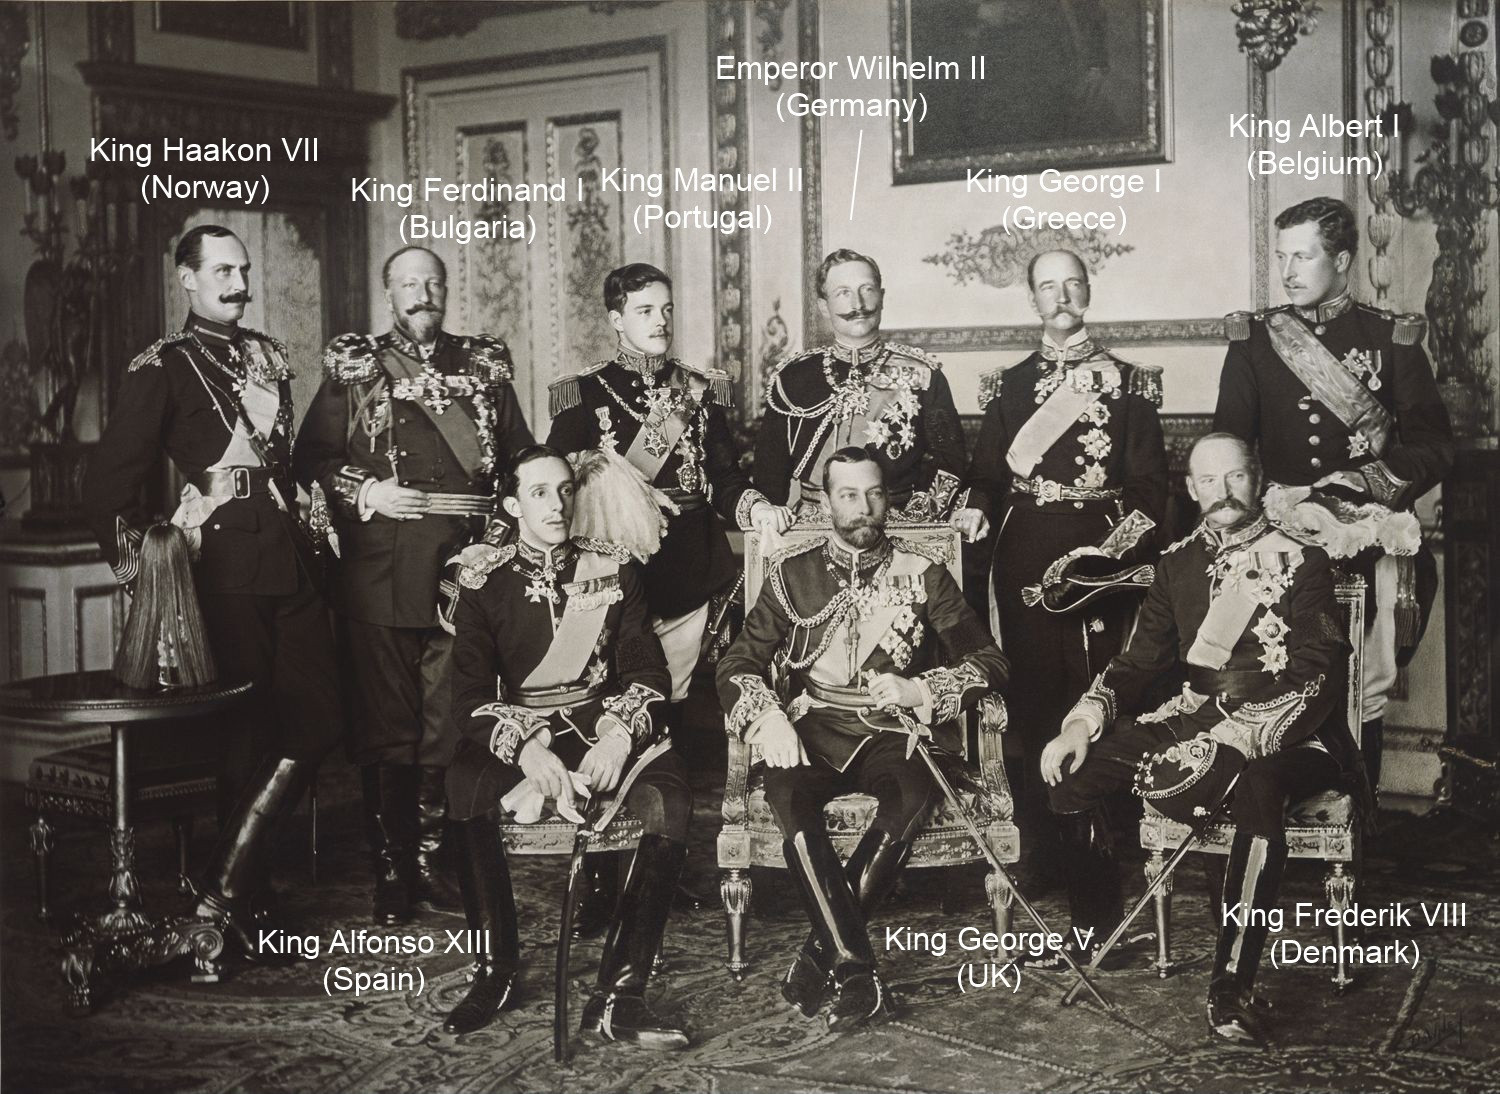 The nine European Monarchs who attended the funeral of Edward VII, photographed at Windsor Castle on 20 May 1910